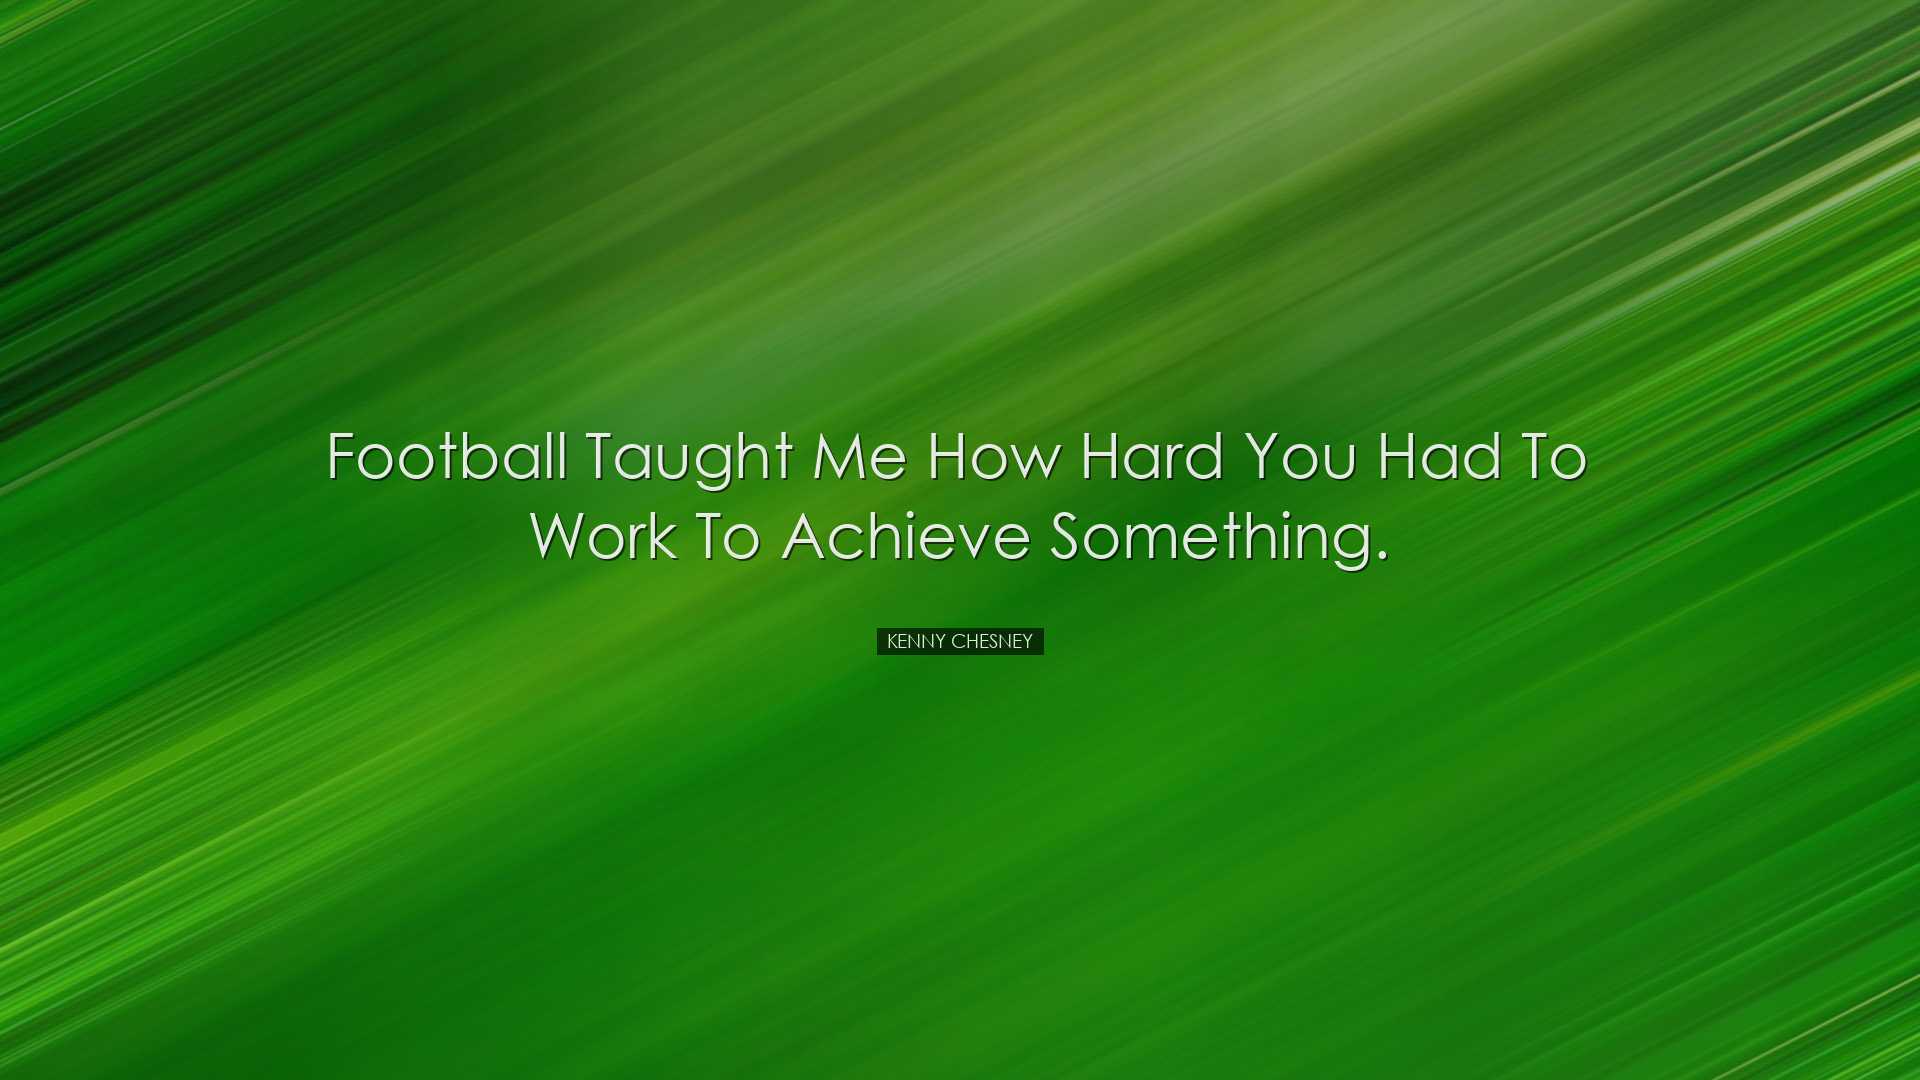 Football taught me how hard you had to work to achieve something.